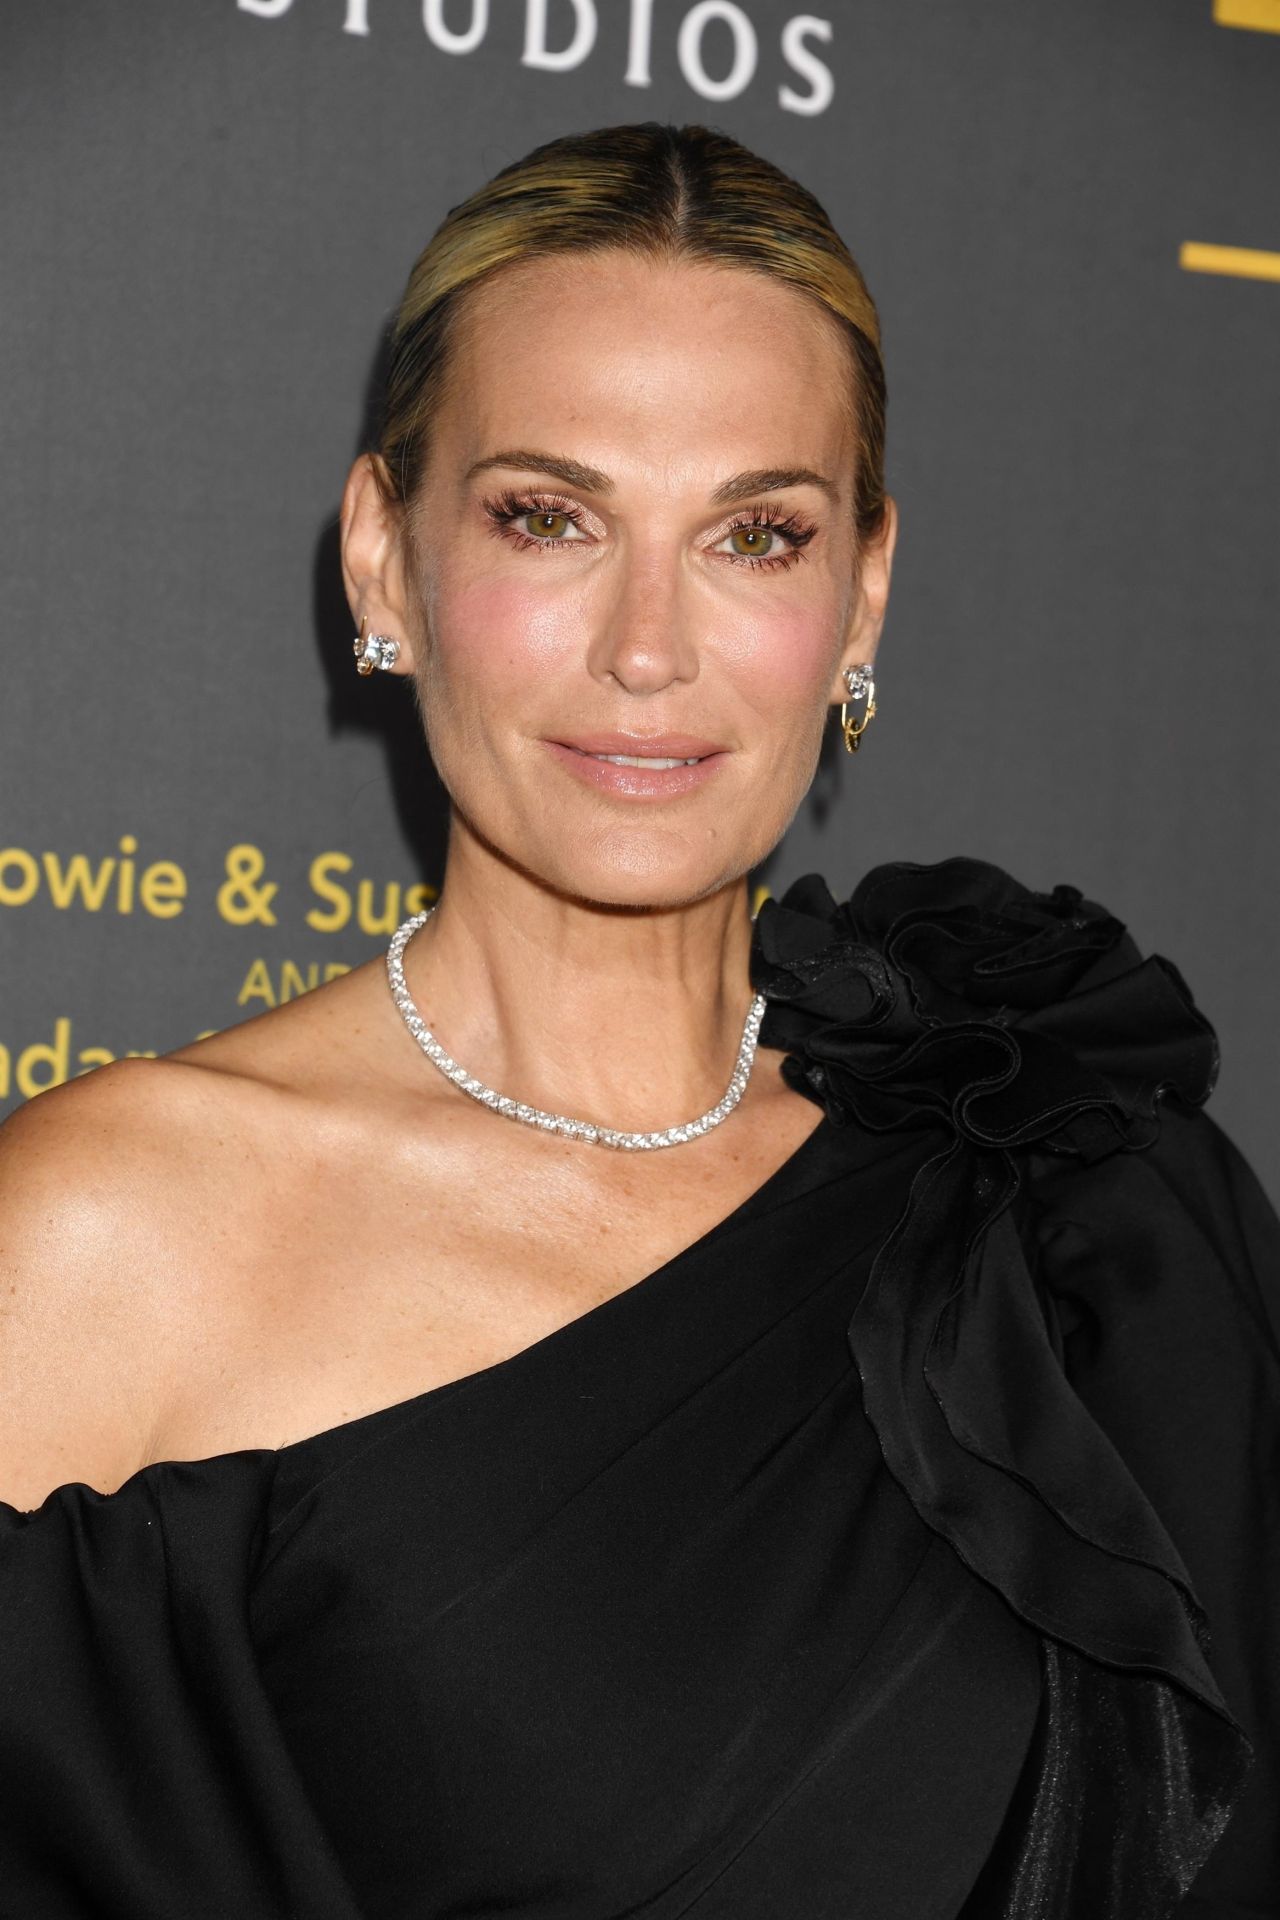 MOLLY SIMS AT JHPIEGO LAUGHTER IS THE BEST MEDICINE GALA IN BEVERLY HILLS